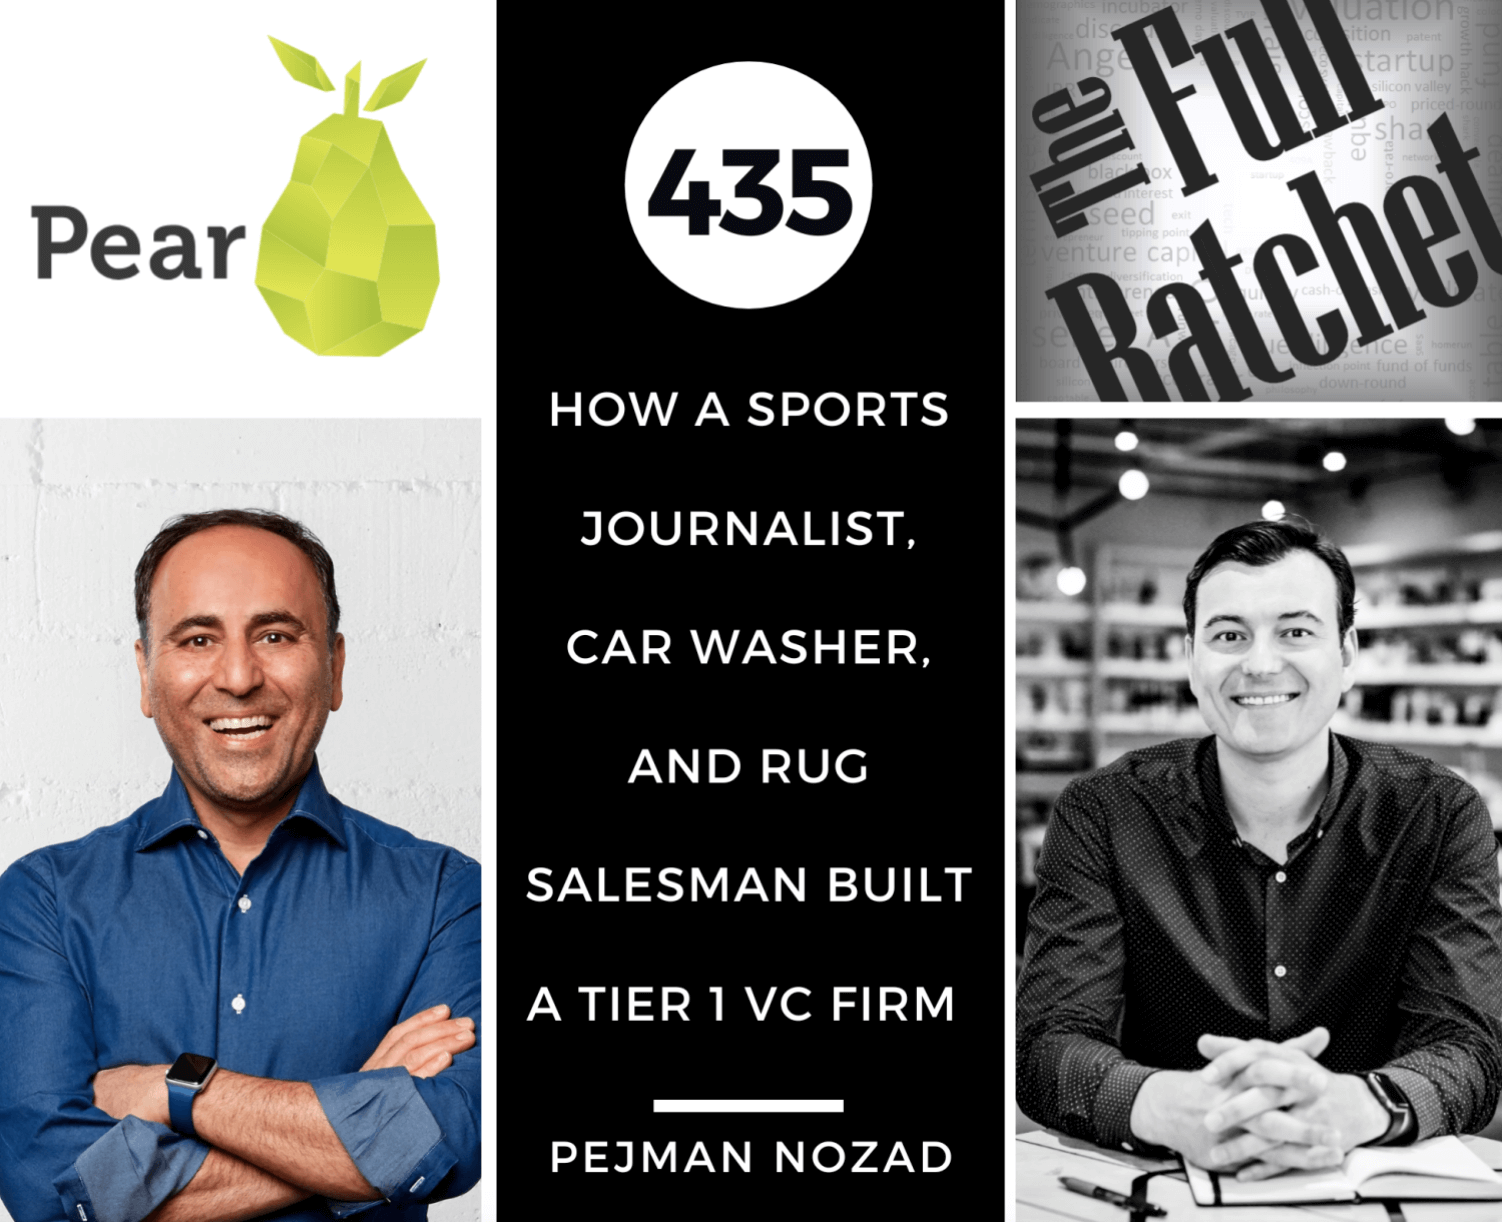 resources The Full Ratchet podcast: How a Sports Journalist, Car Washer, and Rug Salesman Built a Tier 1 VC Firm (Pejman Nozad)